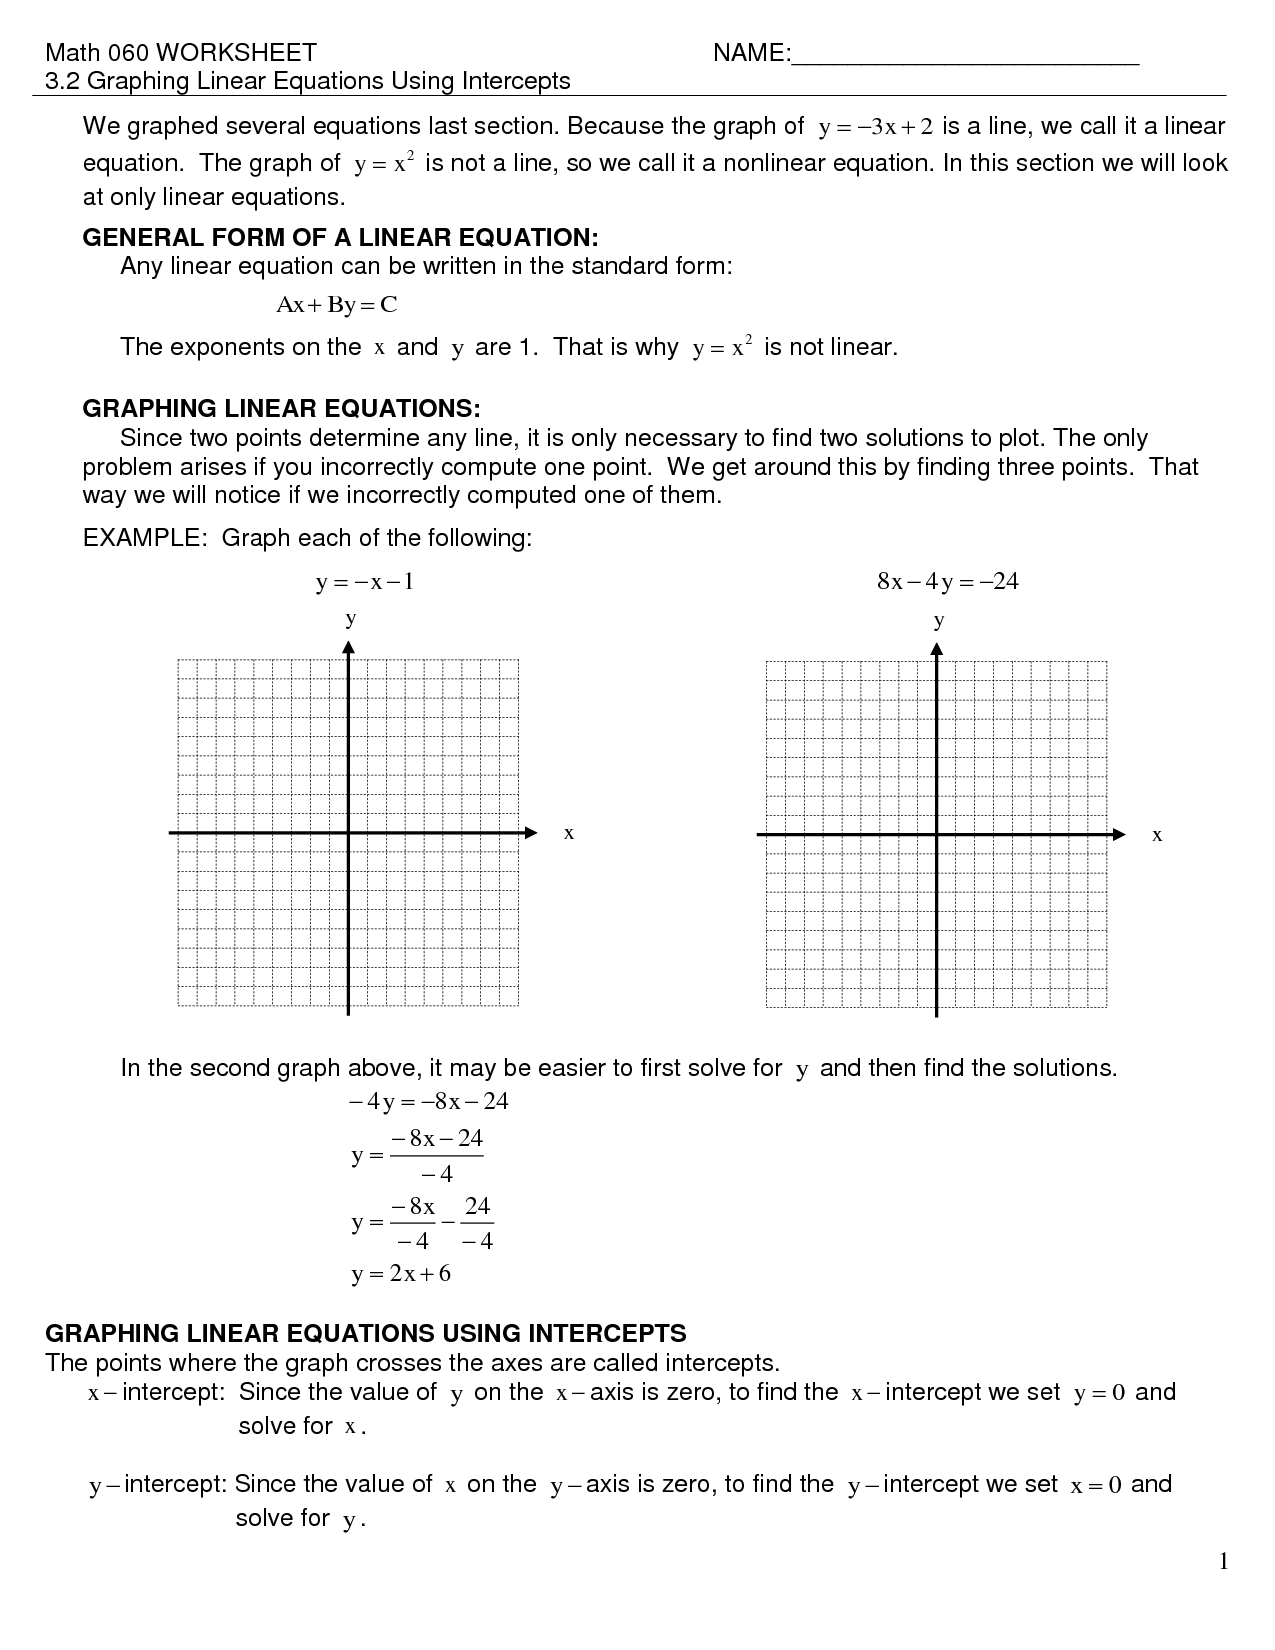 Graphing Linear Equations Worksheet Image